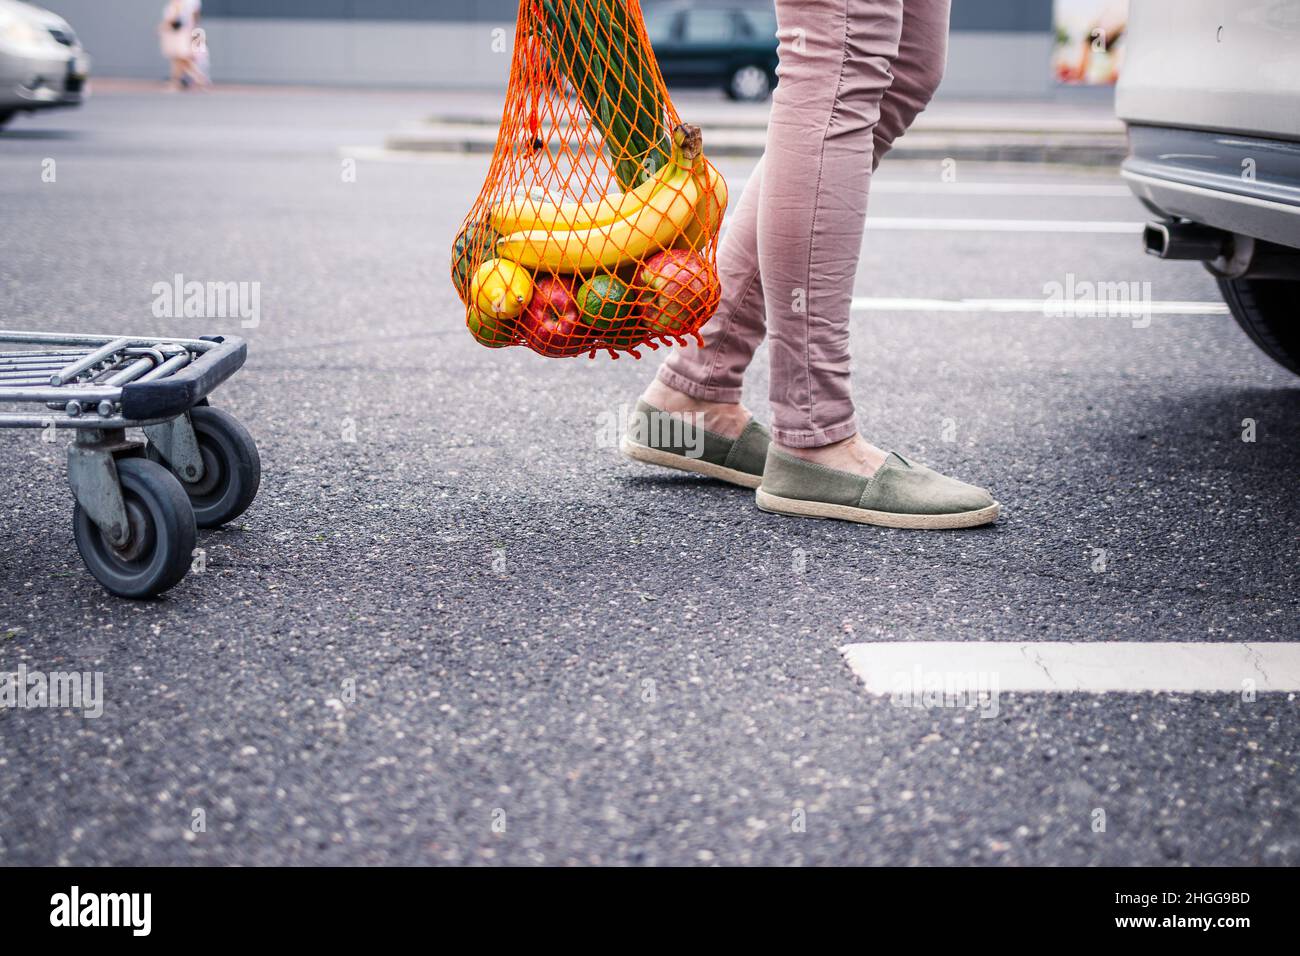 Reusable mesh bag with groceries purchased. Woman standing at parking lot after plastic free shopping at supermarket. Ethical consumerism and sustaina Stock Photo